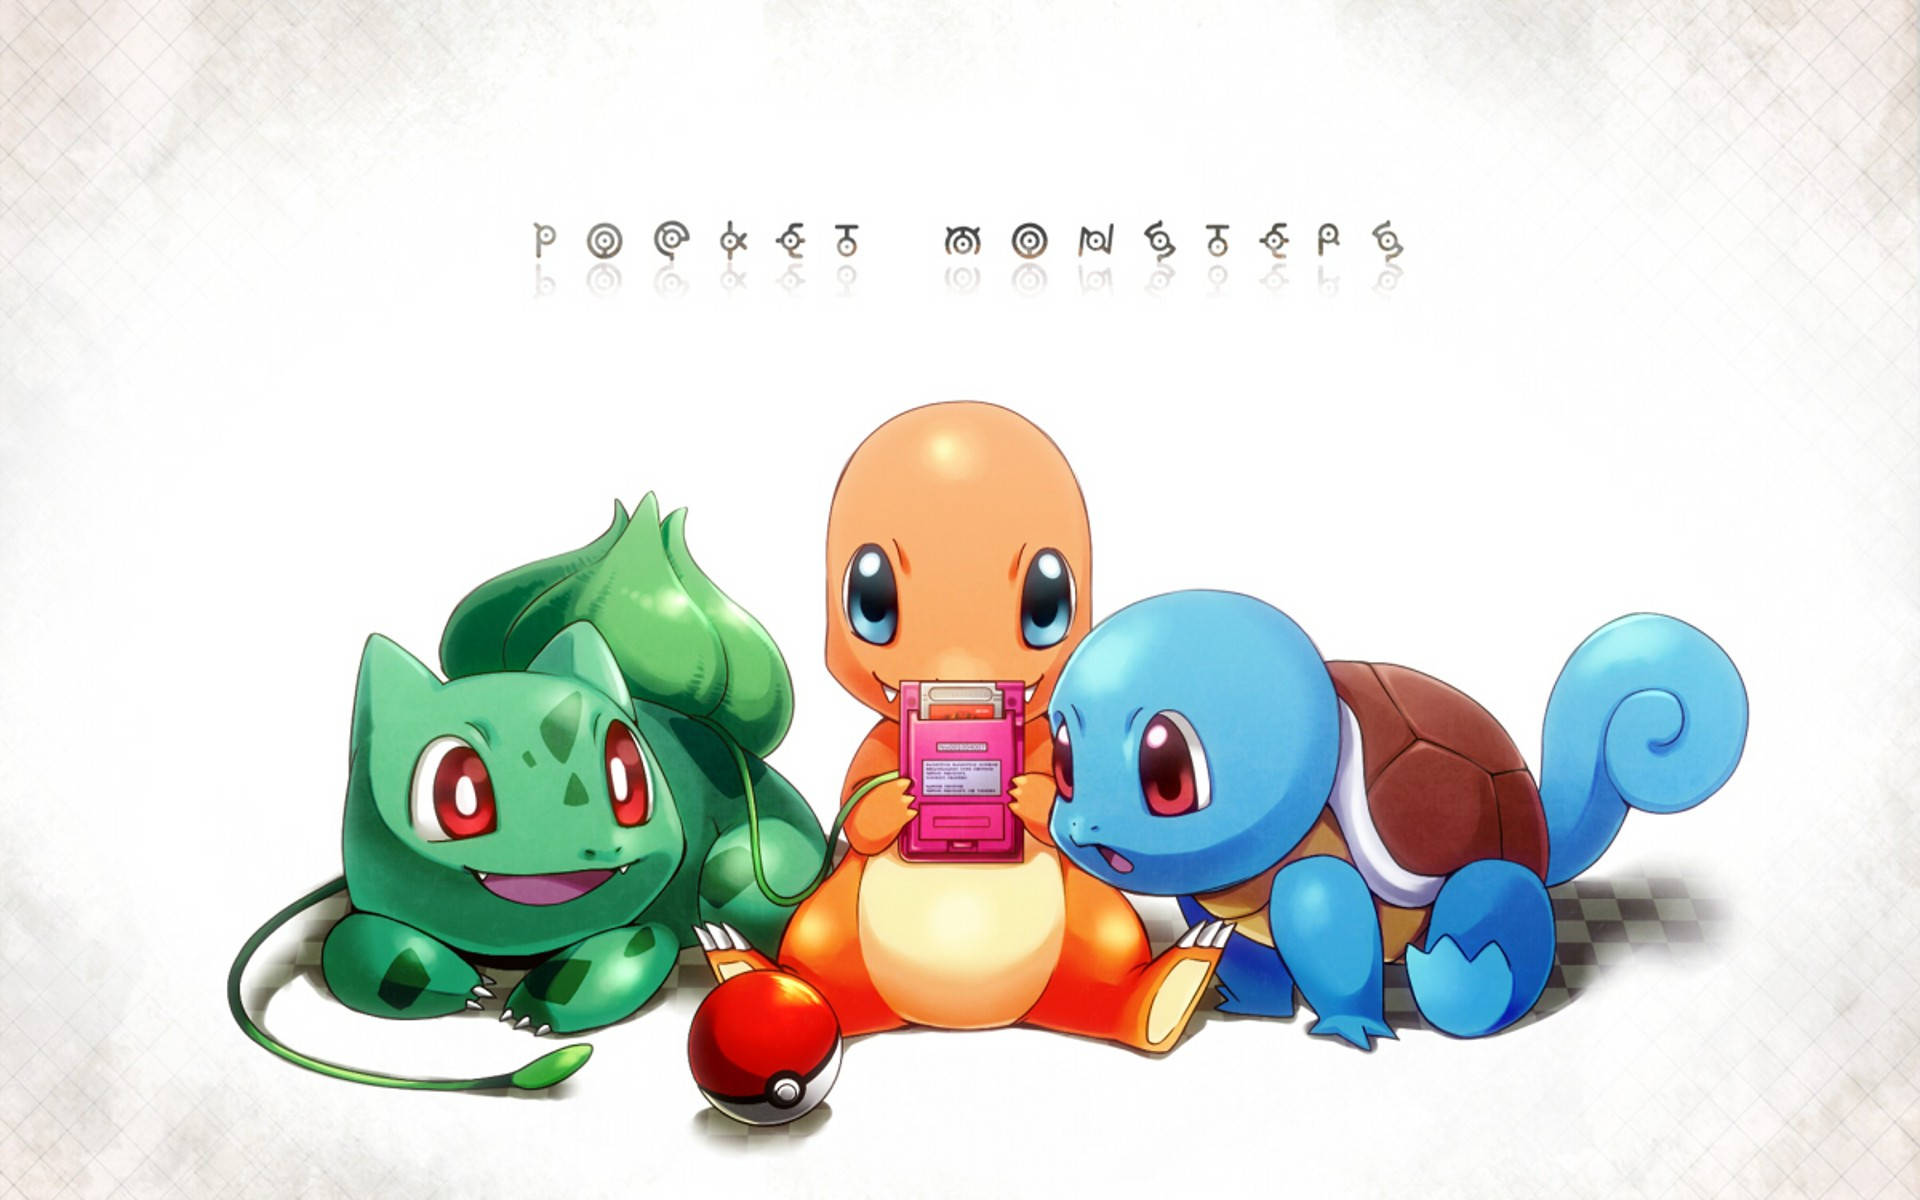 Cute Pokemon Pocket Monsters Picture